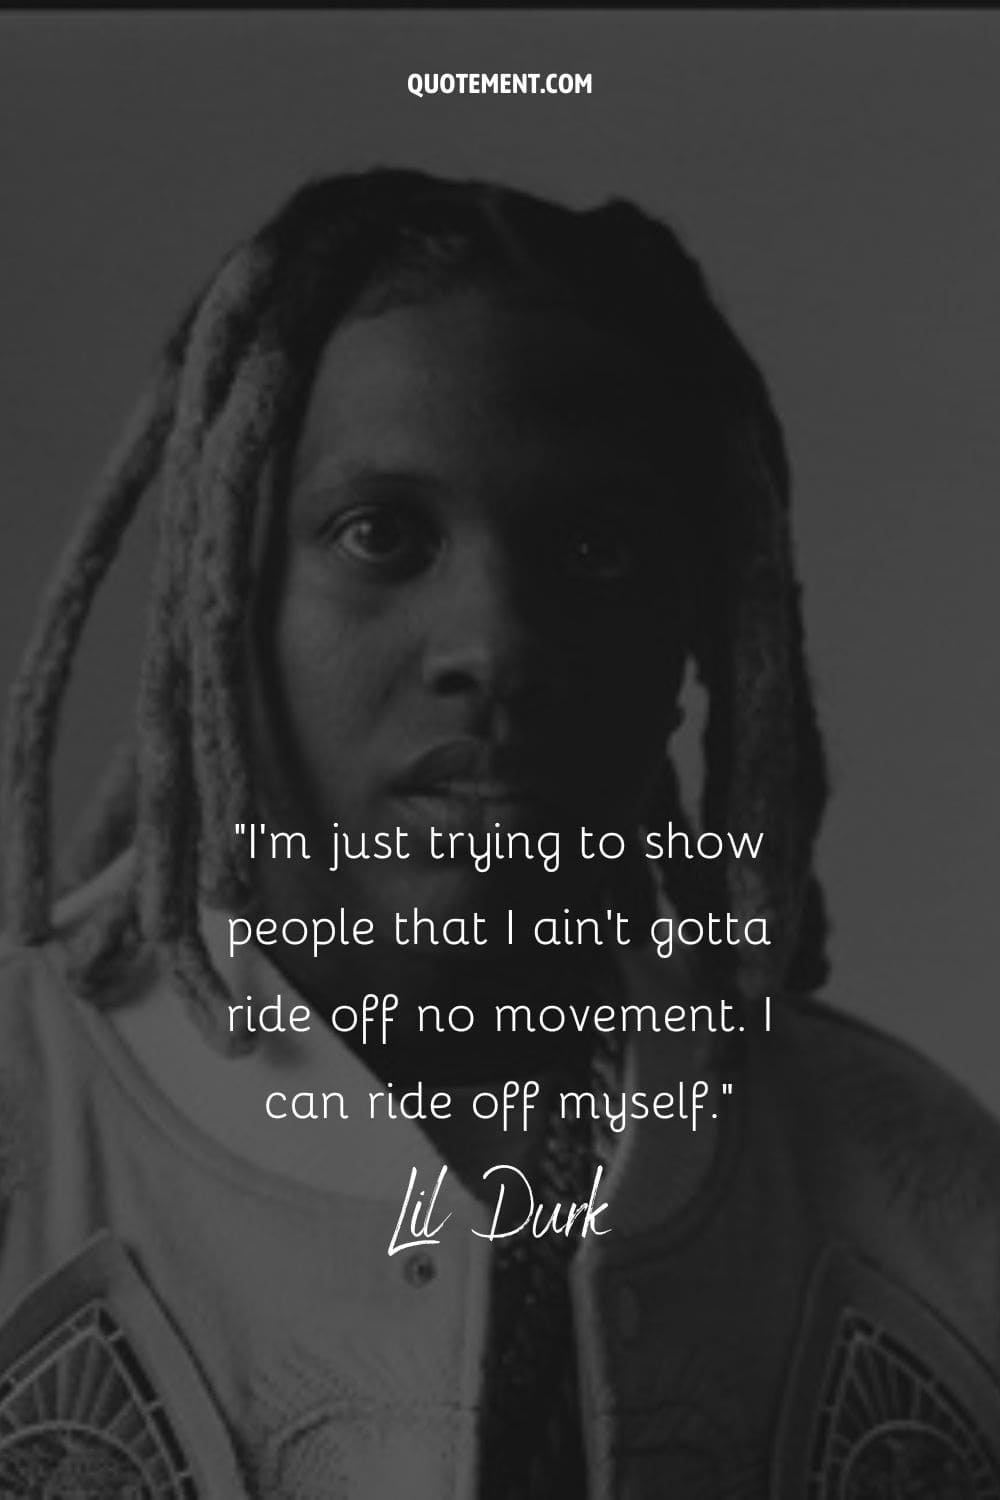 dreadlocked Lil Durk striking a pose representing top Lil Durk quote